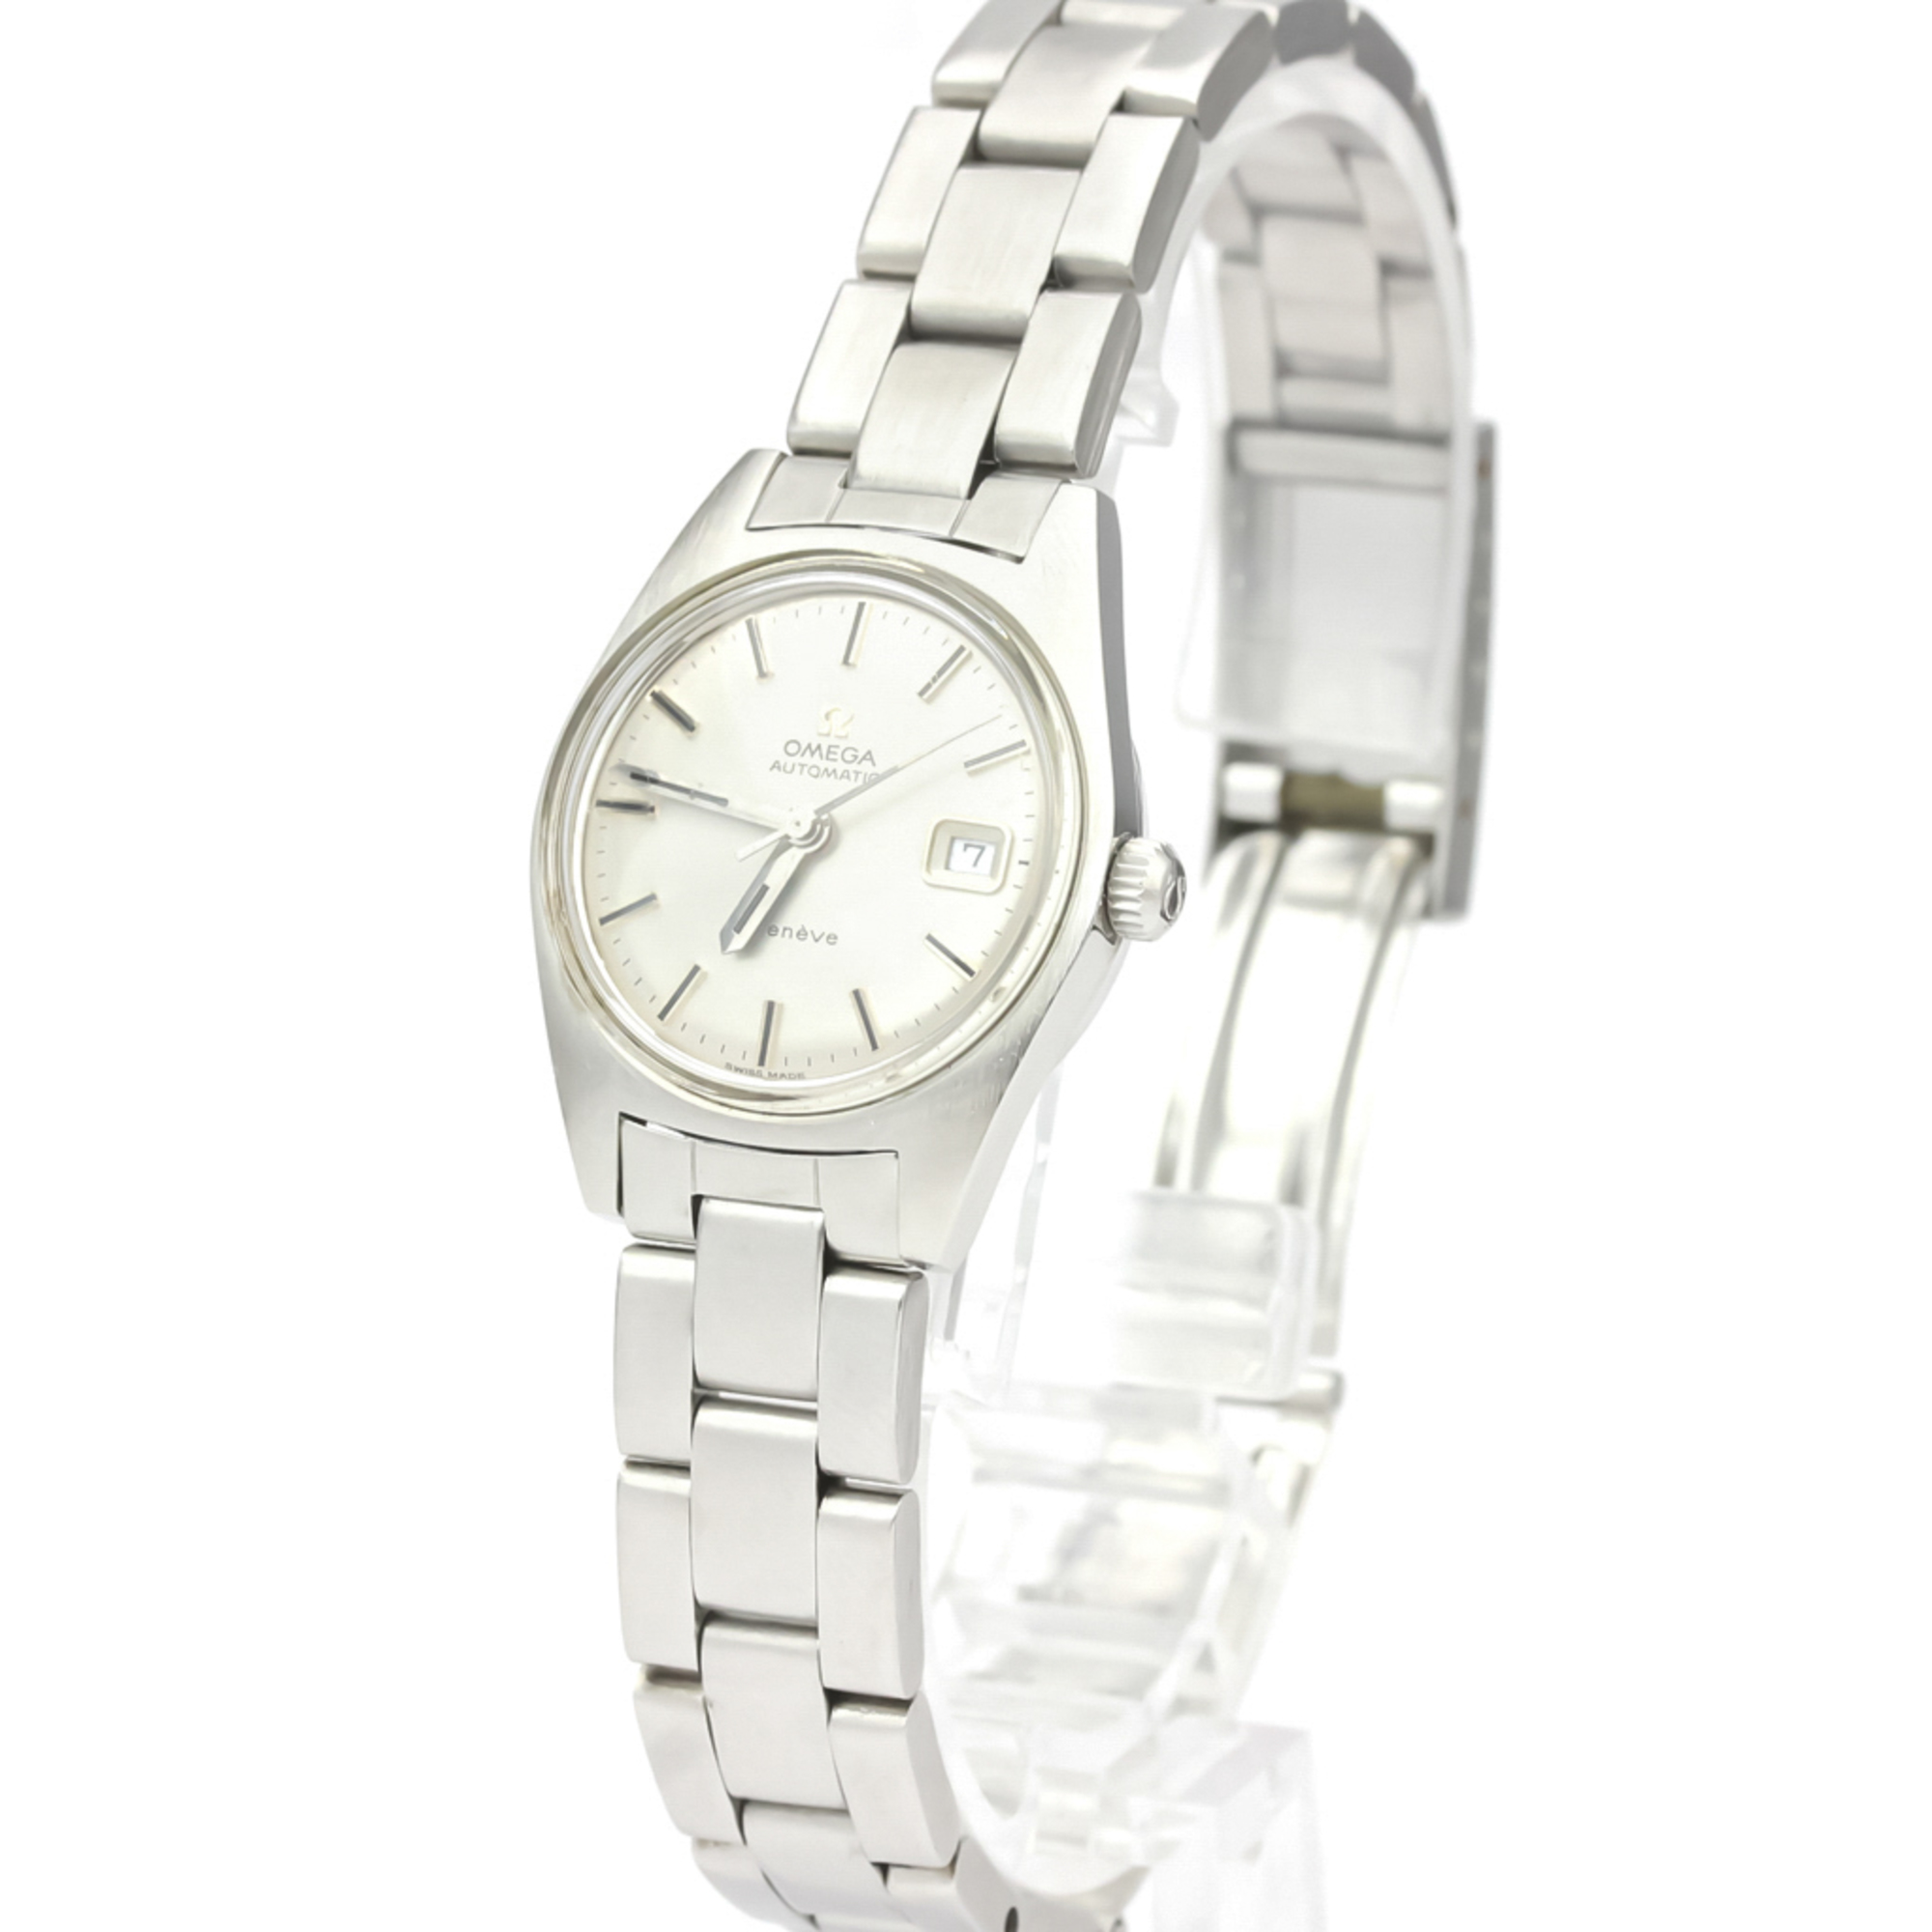 Omega Geneve Automatic Stainless Steel Women's Dress Watch 566.012